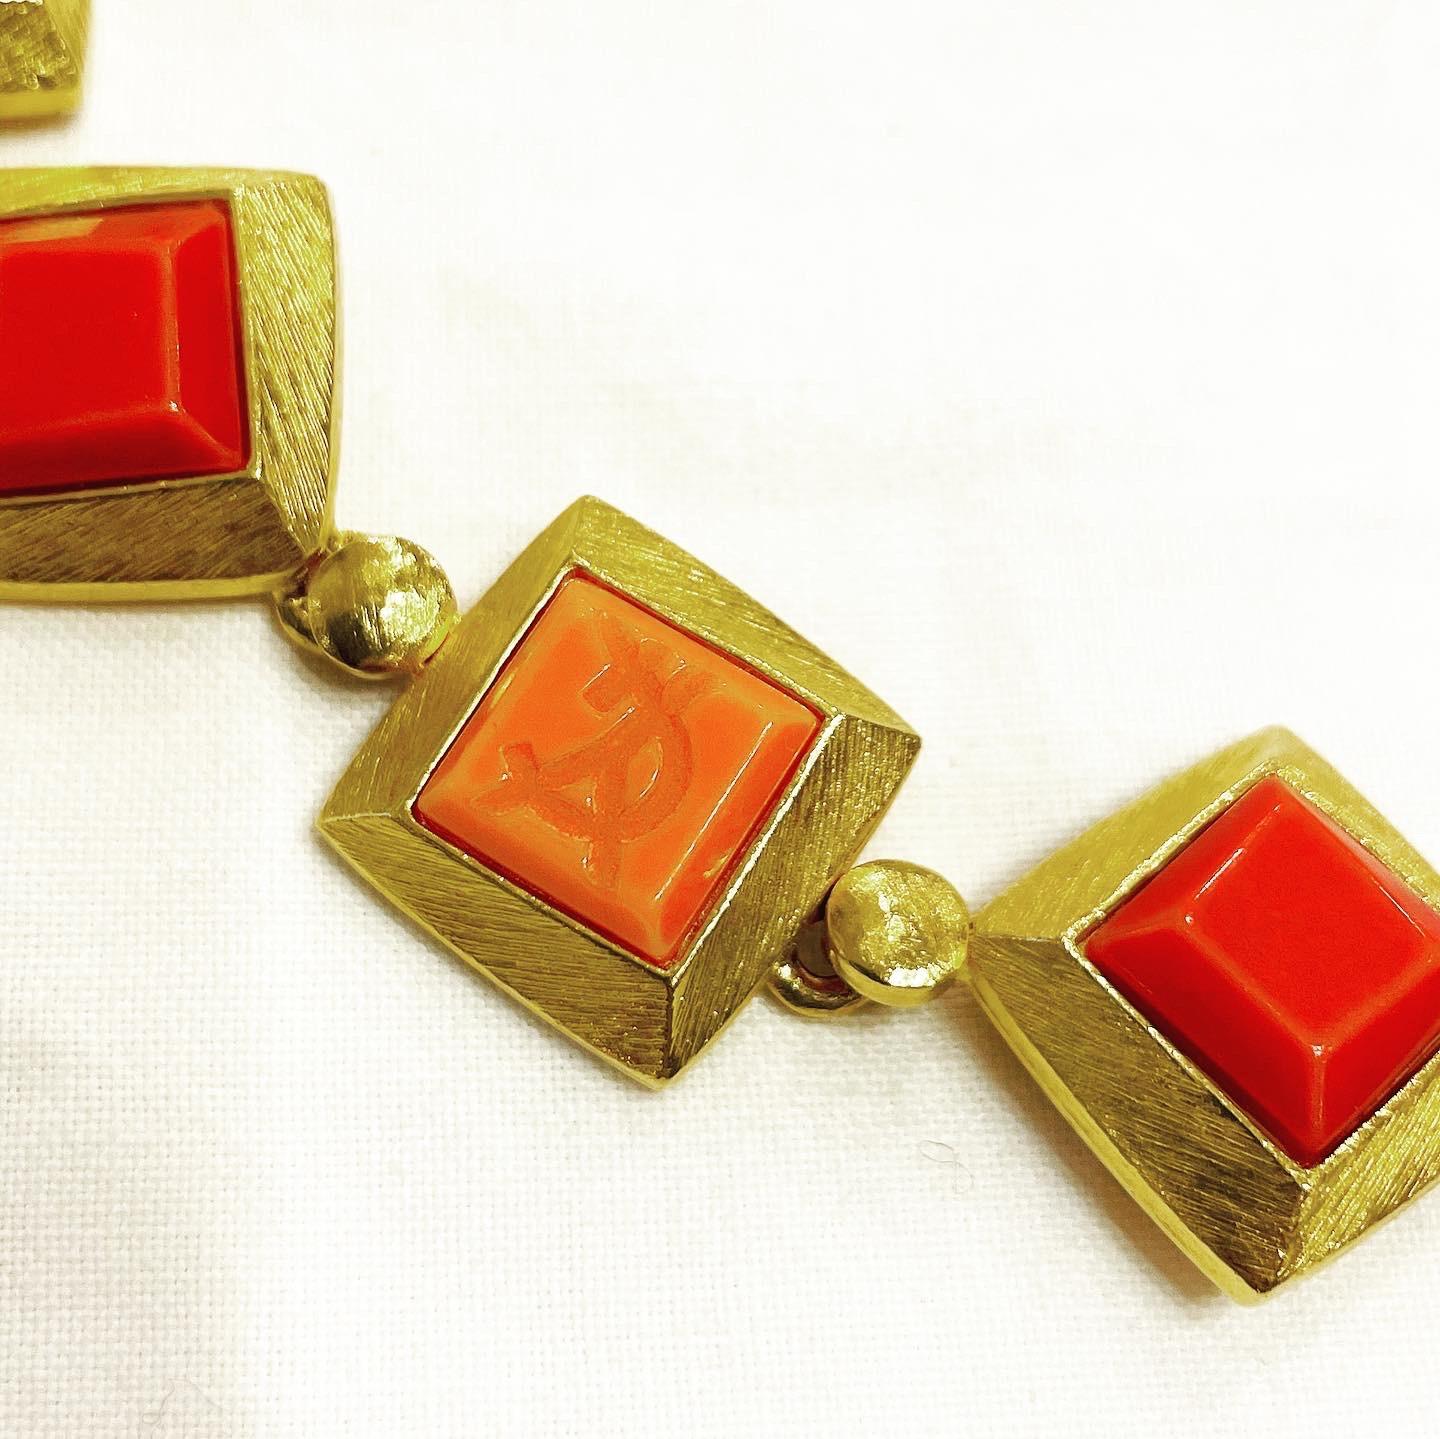 1980s gorgeous vintage YVES SAINT LAURENT square shape orange and red resin choker necklace! 
Gilt chain with the YSL logo. 
Can really add just that little extra elegance to any outfit! 
Great with jeans, and perfect with a dress.
You can wear it